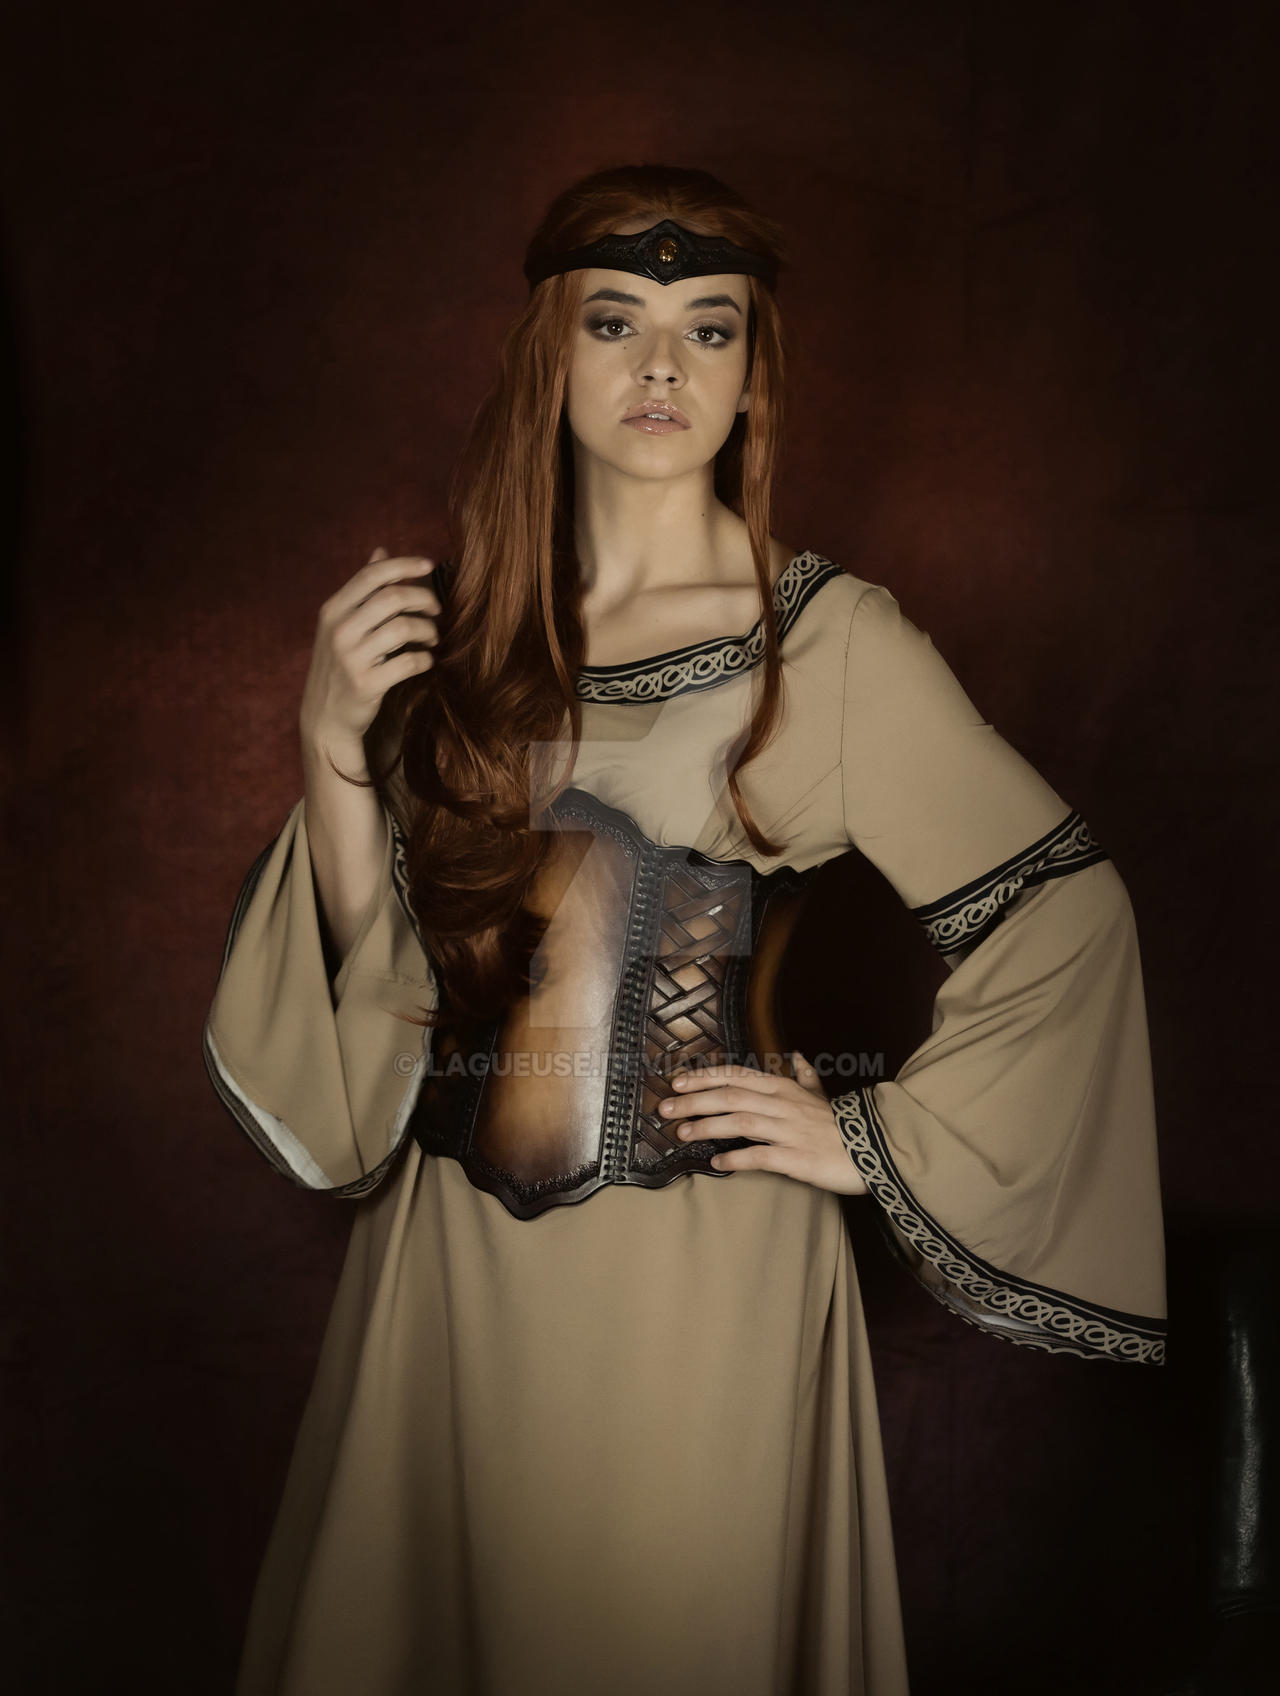 leather corset medieval princess by Lagueuse on DeviantArt